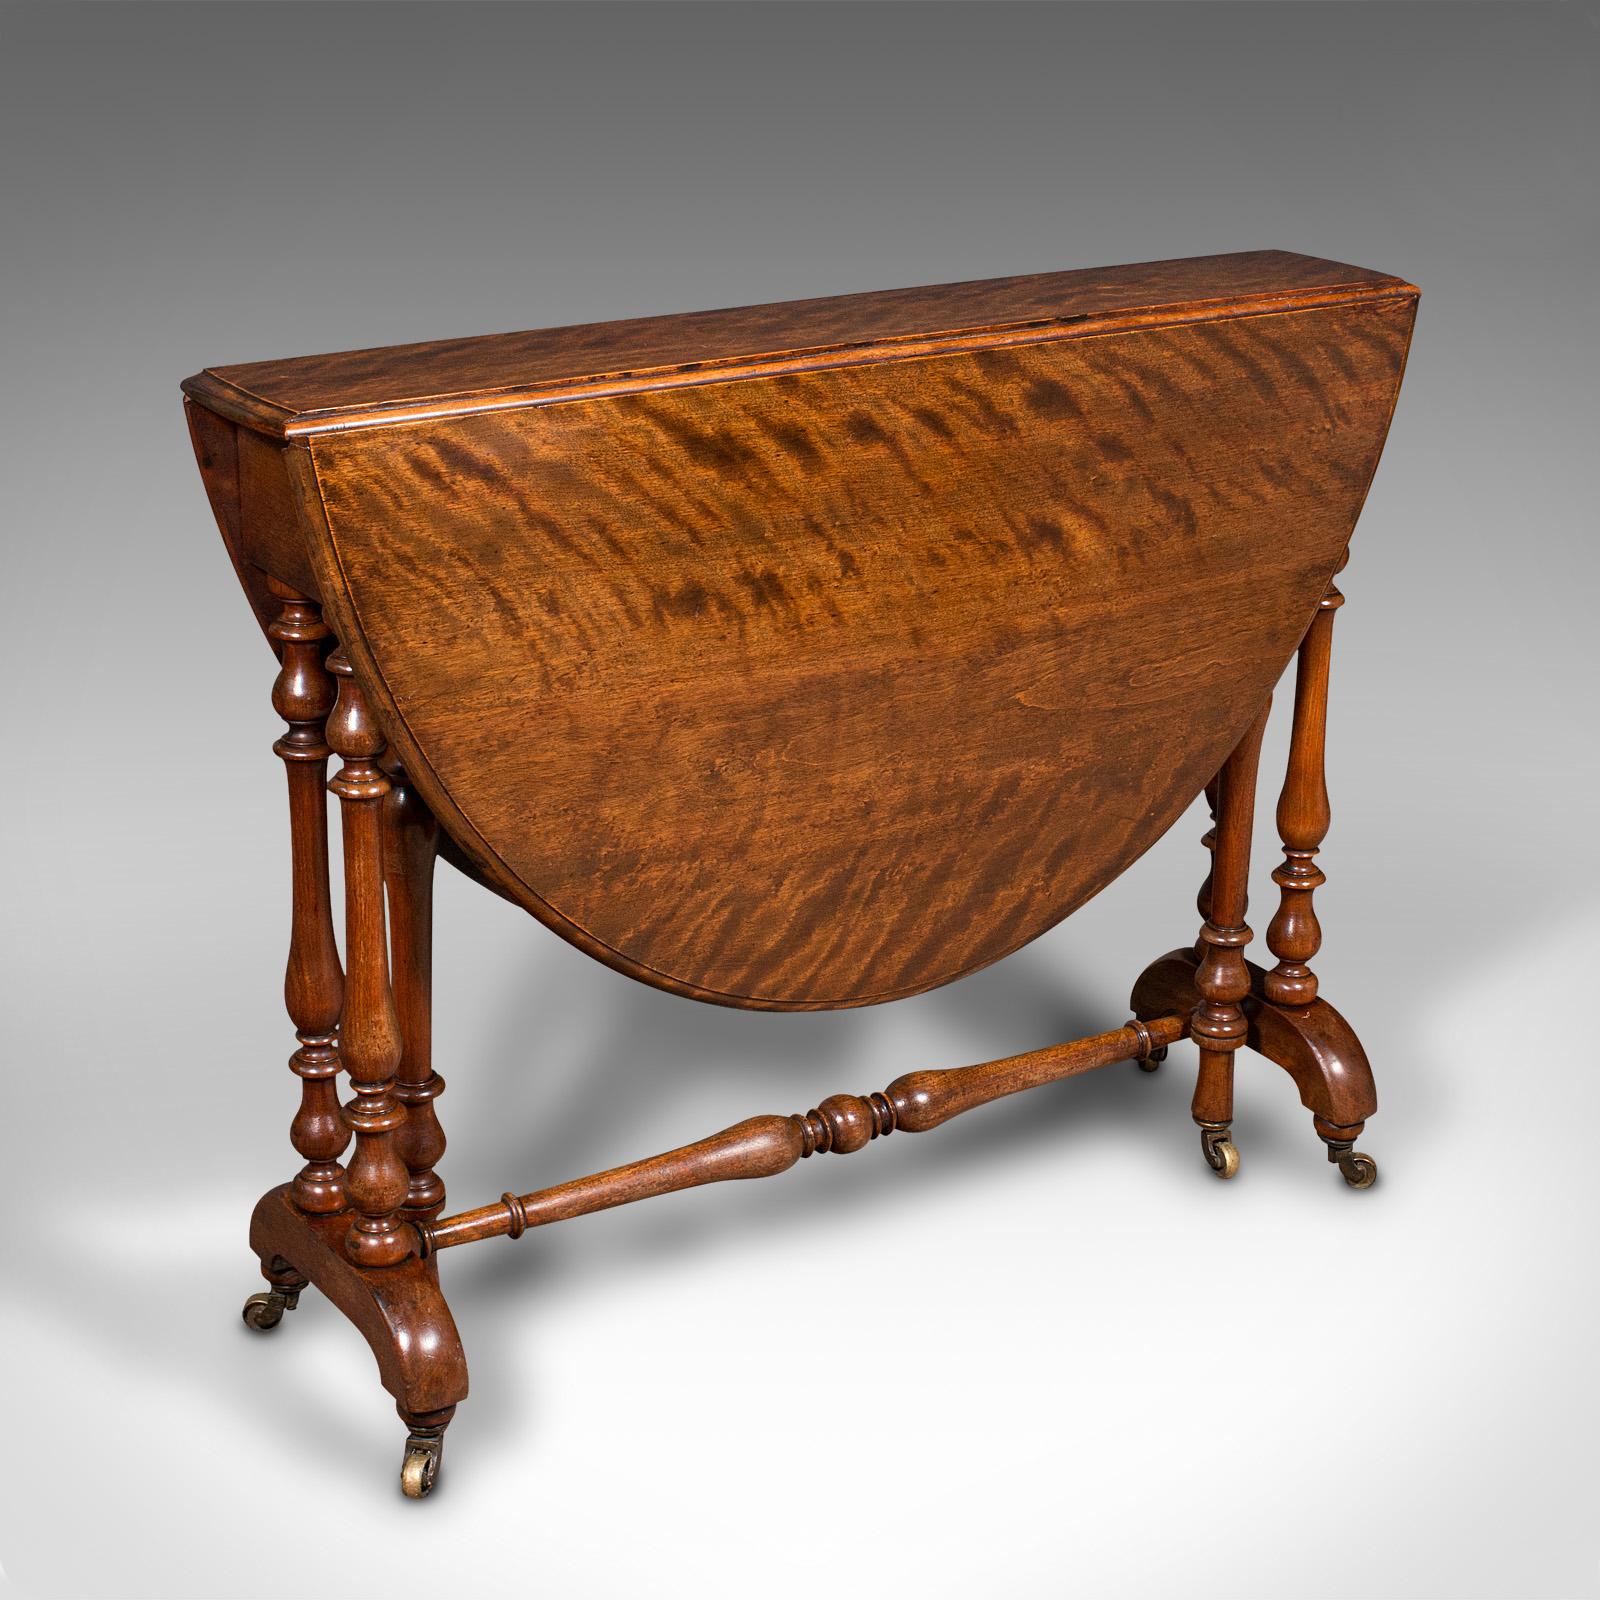 This is an antique oval Sutherland table. An English, satin mahogany gate-leg occasional table, dating to the early Victorian period, circa 1850.

Graced with exquisite figuring and deep colour
Displays a desirable aged patina and in very good